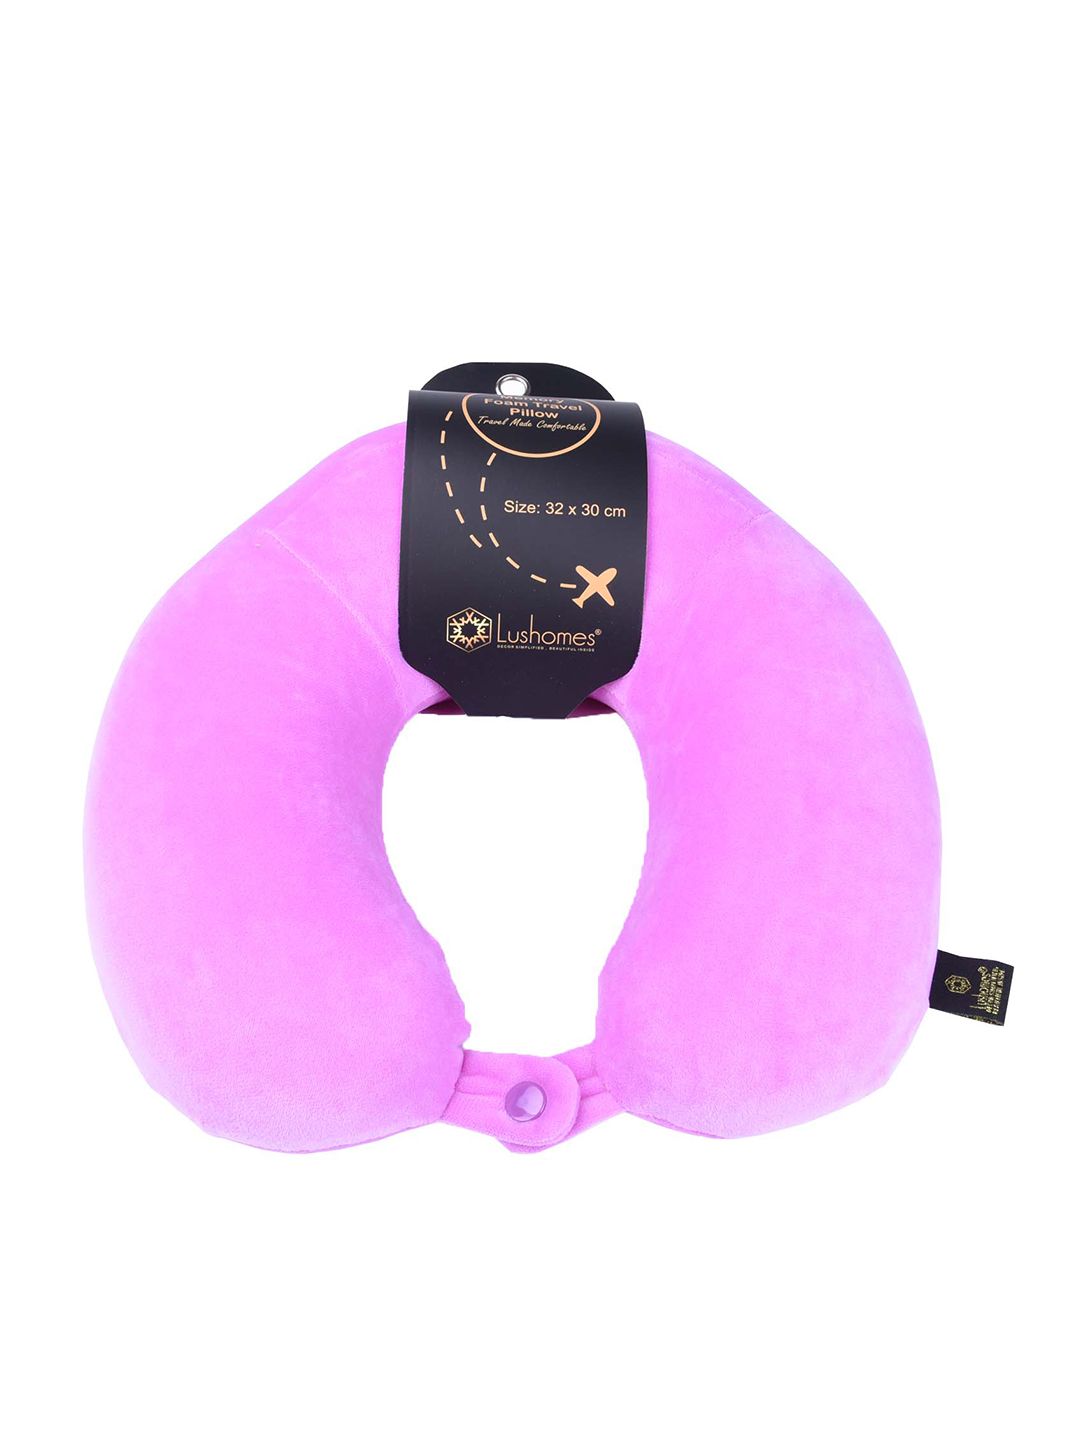 Lushomes Purple Travel Neck and Back Pillow Price in India